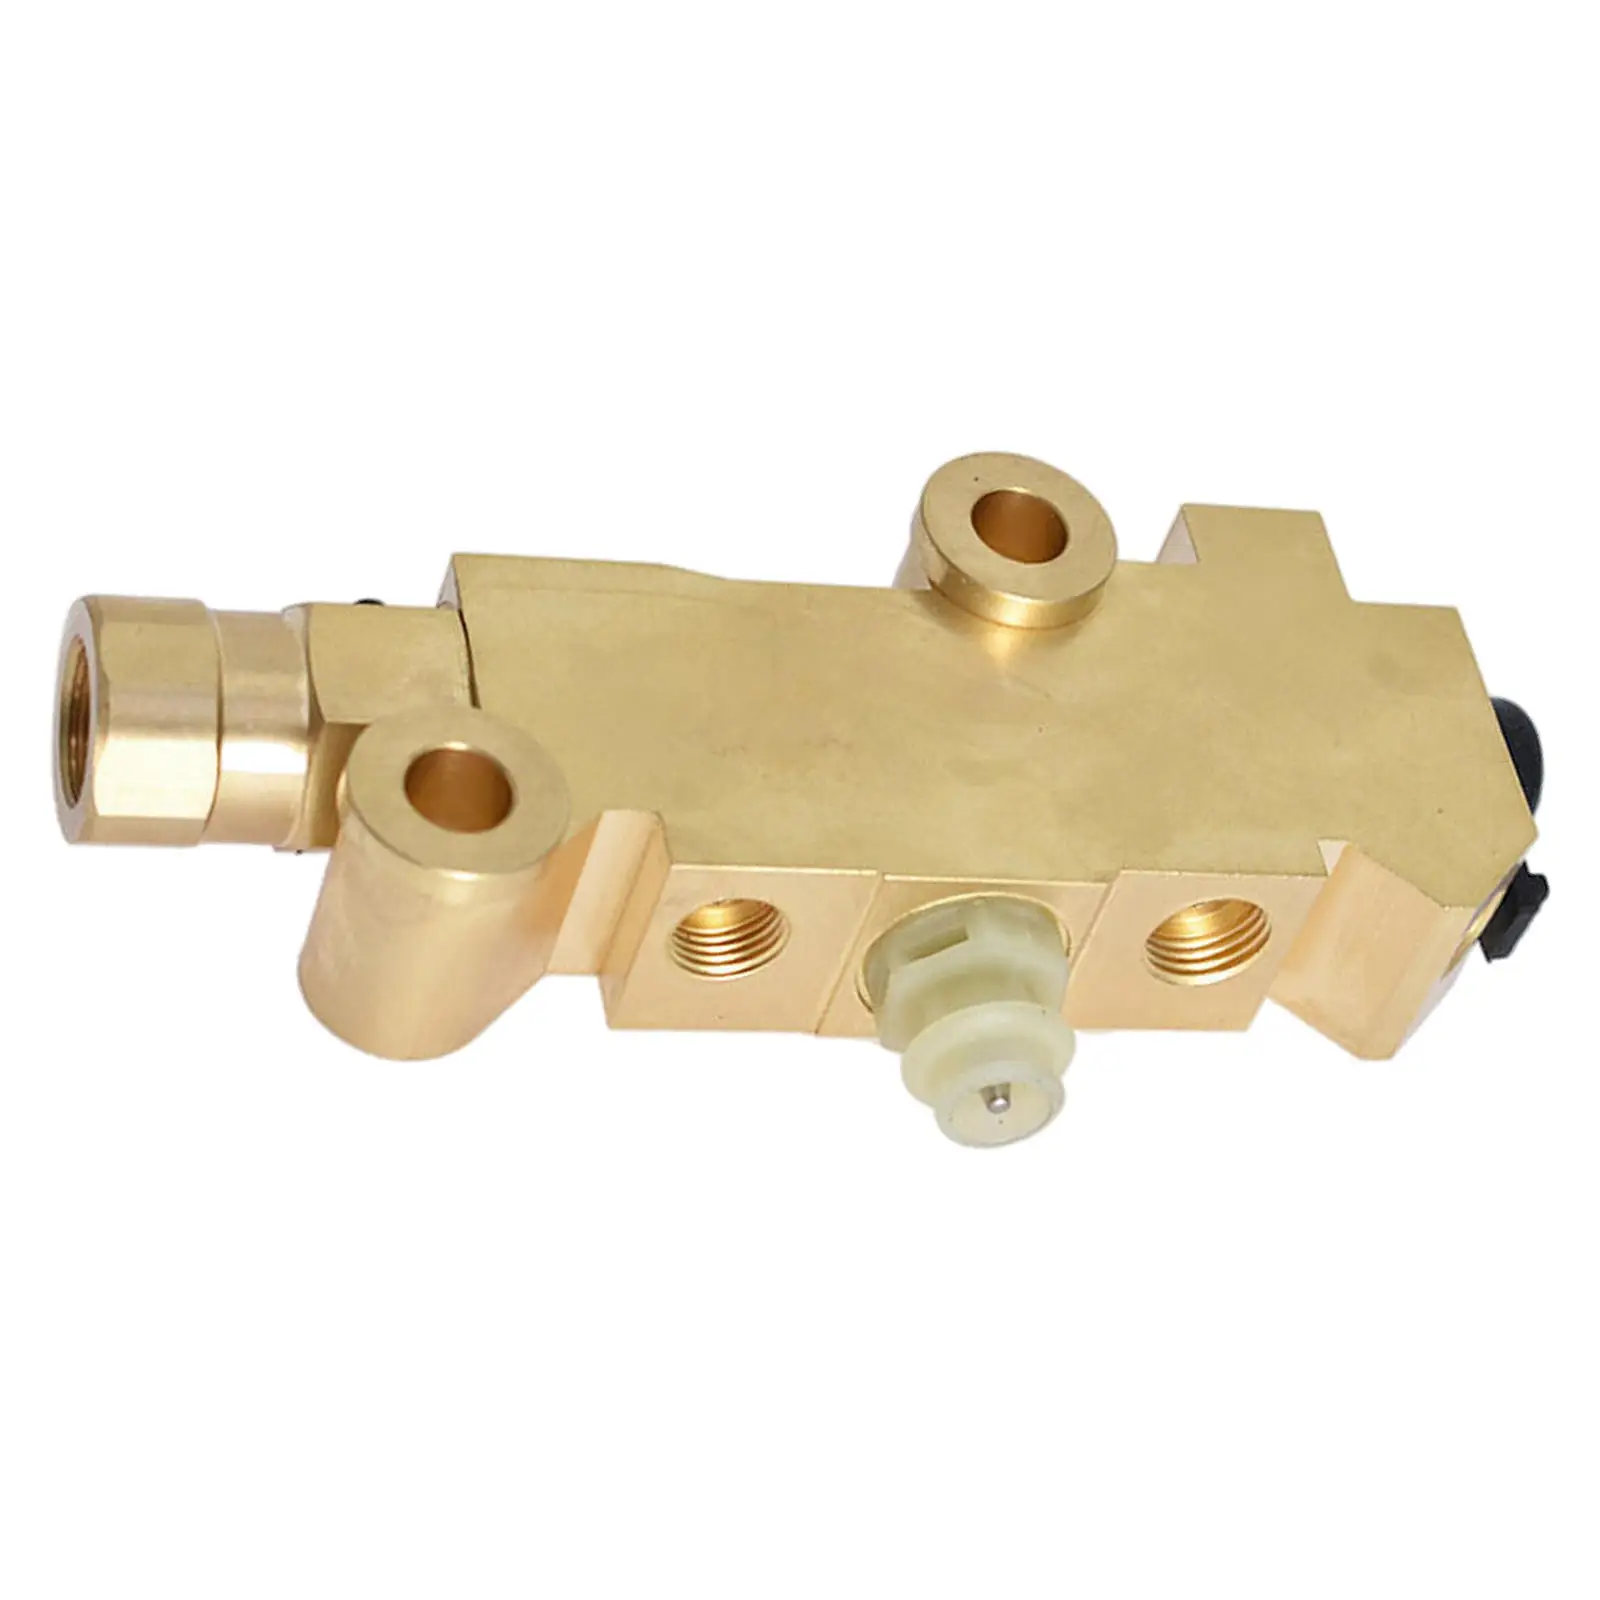 Disc/Drum Proportioning Valve Fits for Chevrolet C10 4.3L 262Cu. in. V6 Gas 1986 Spare Parts Vehicle Accessories